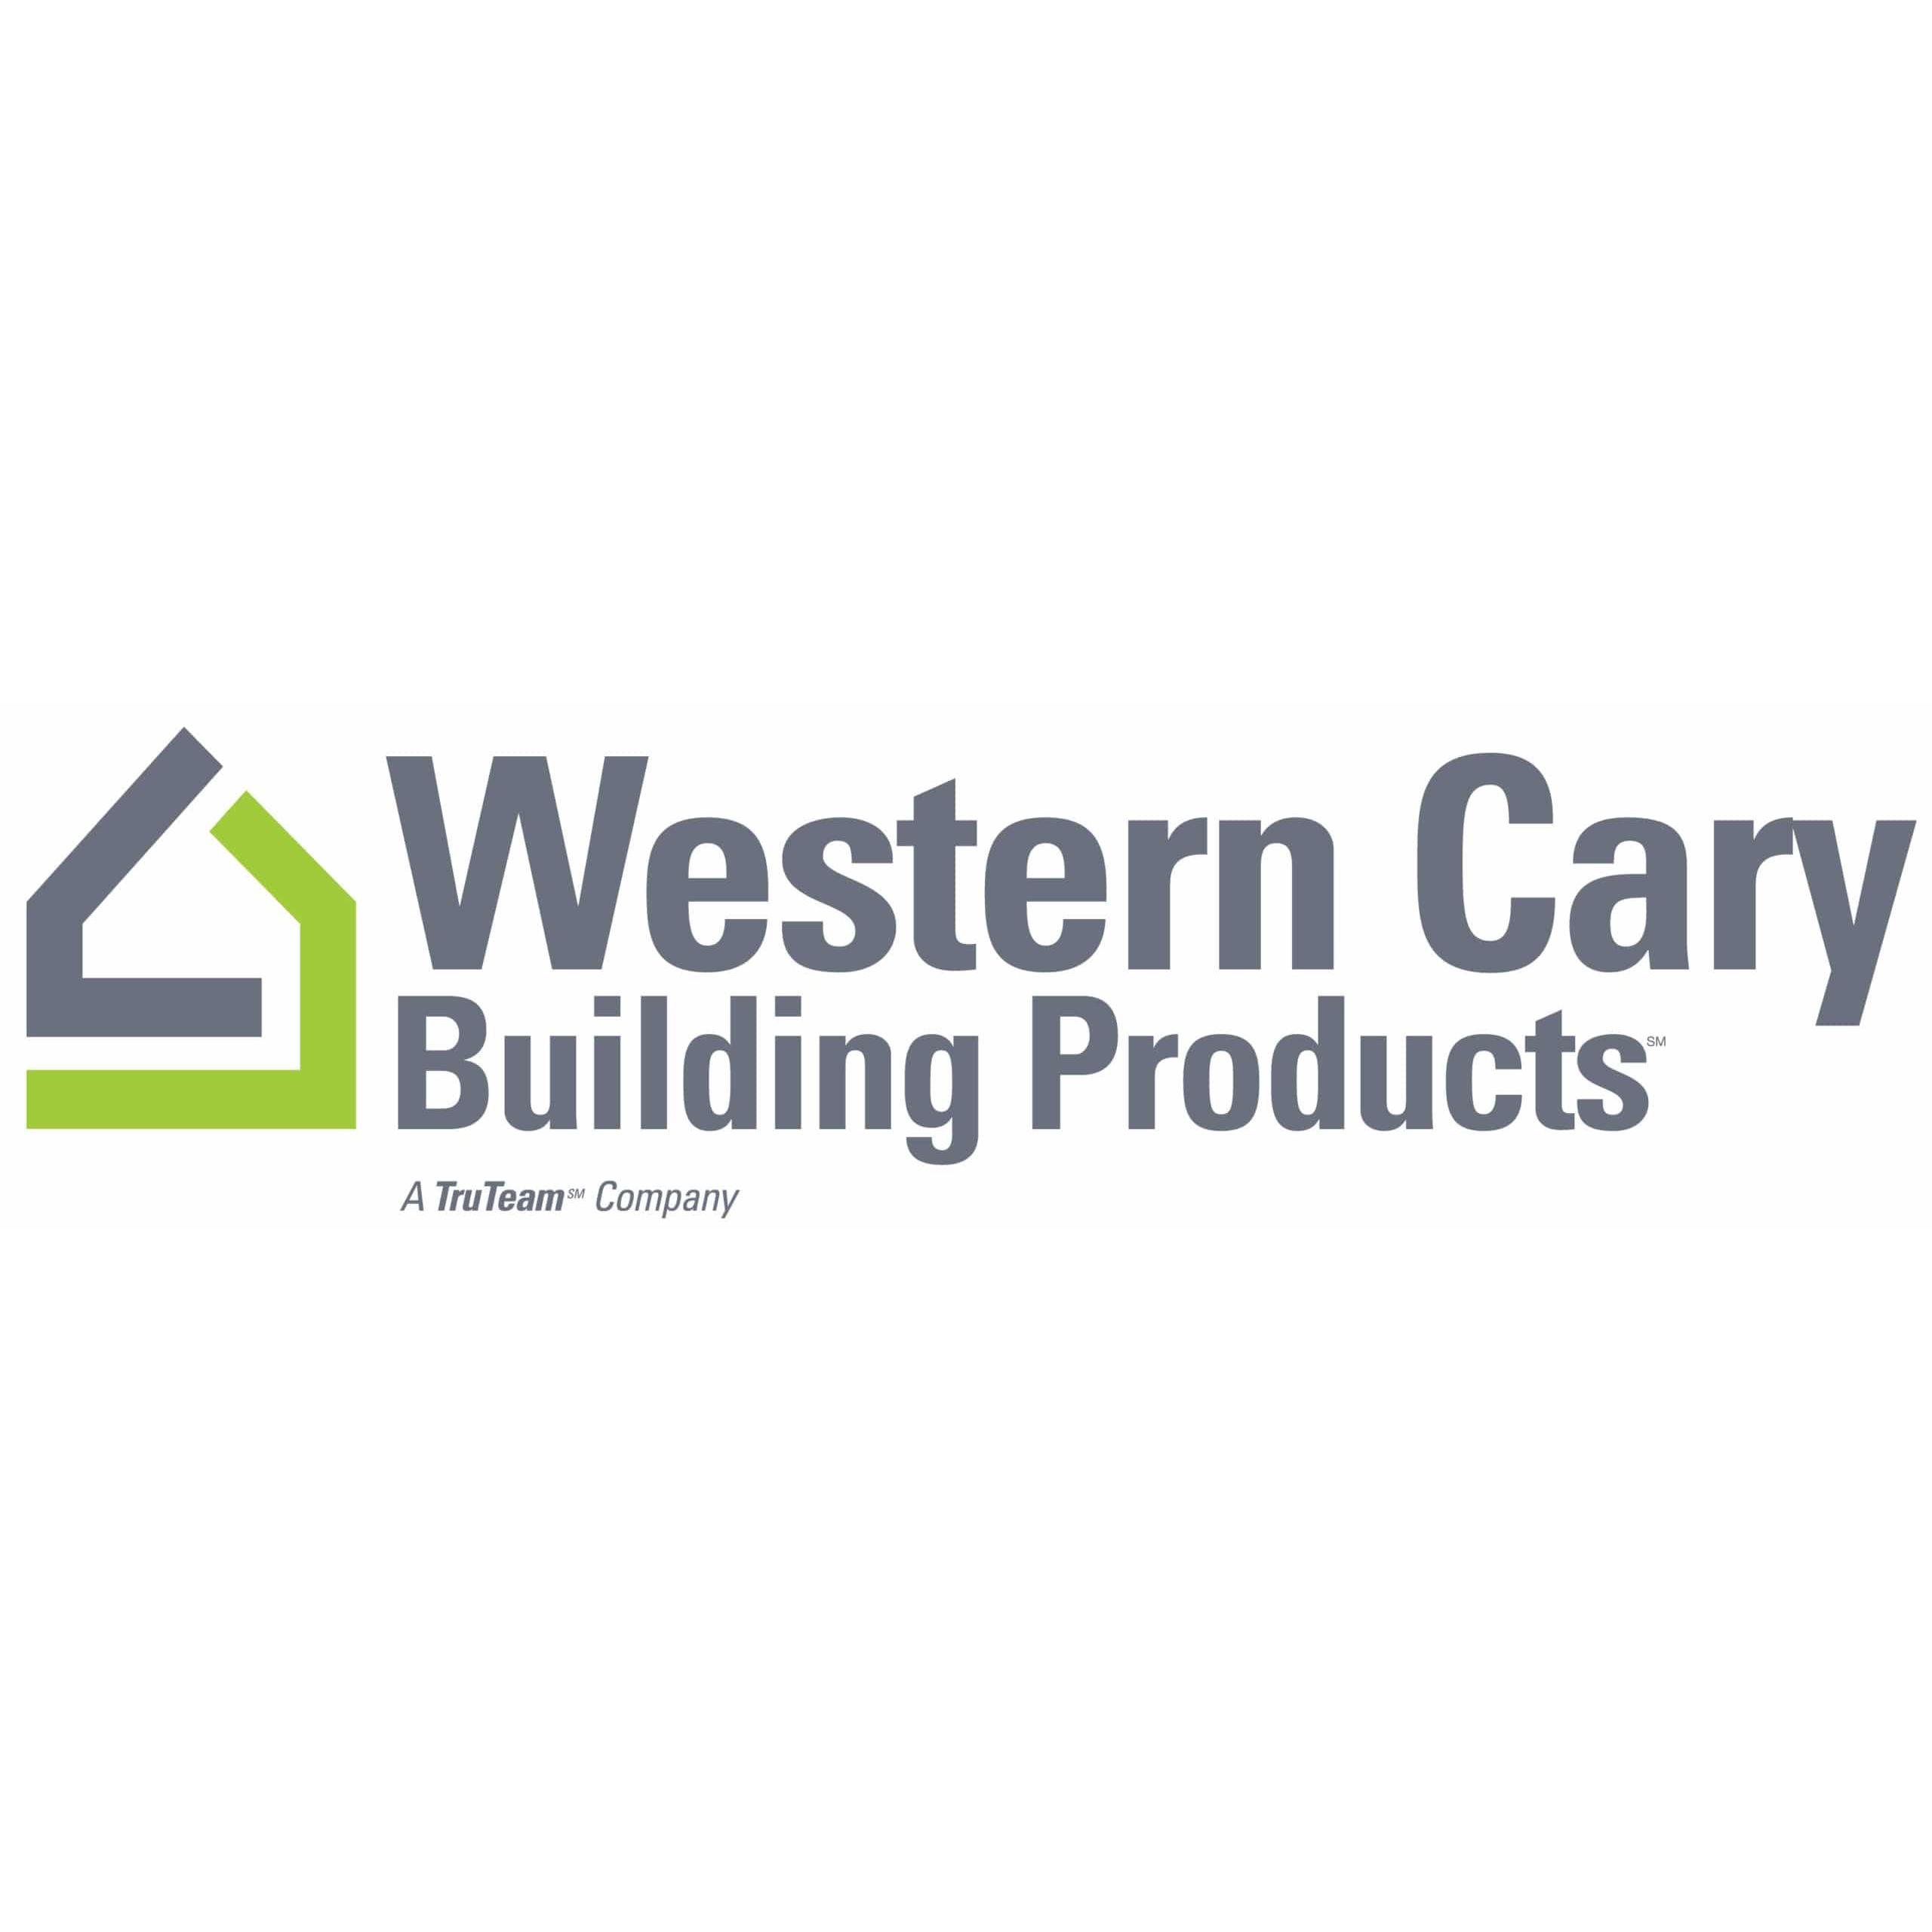 Western Cary Building Products